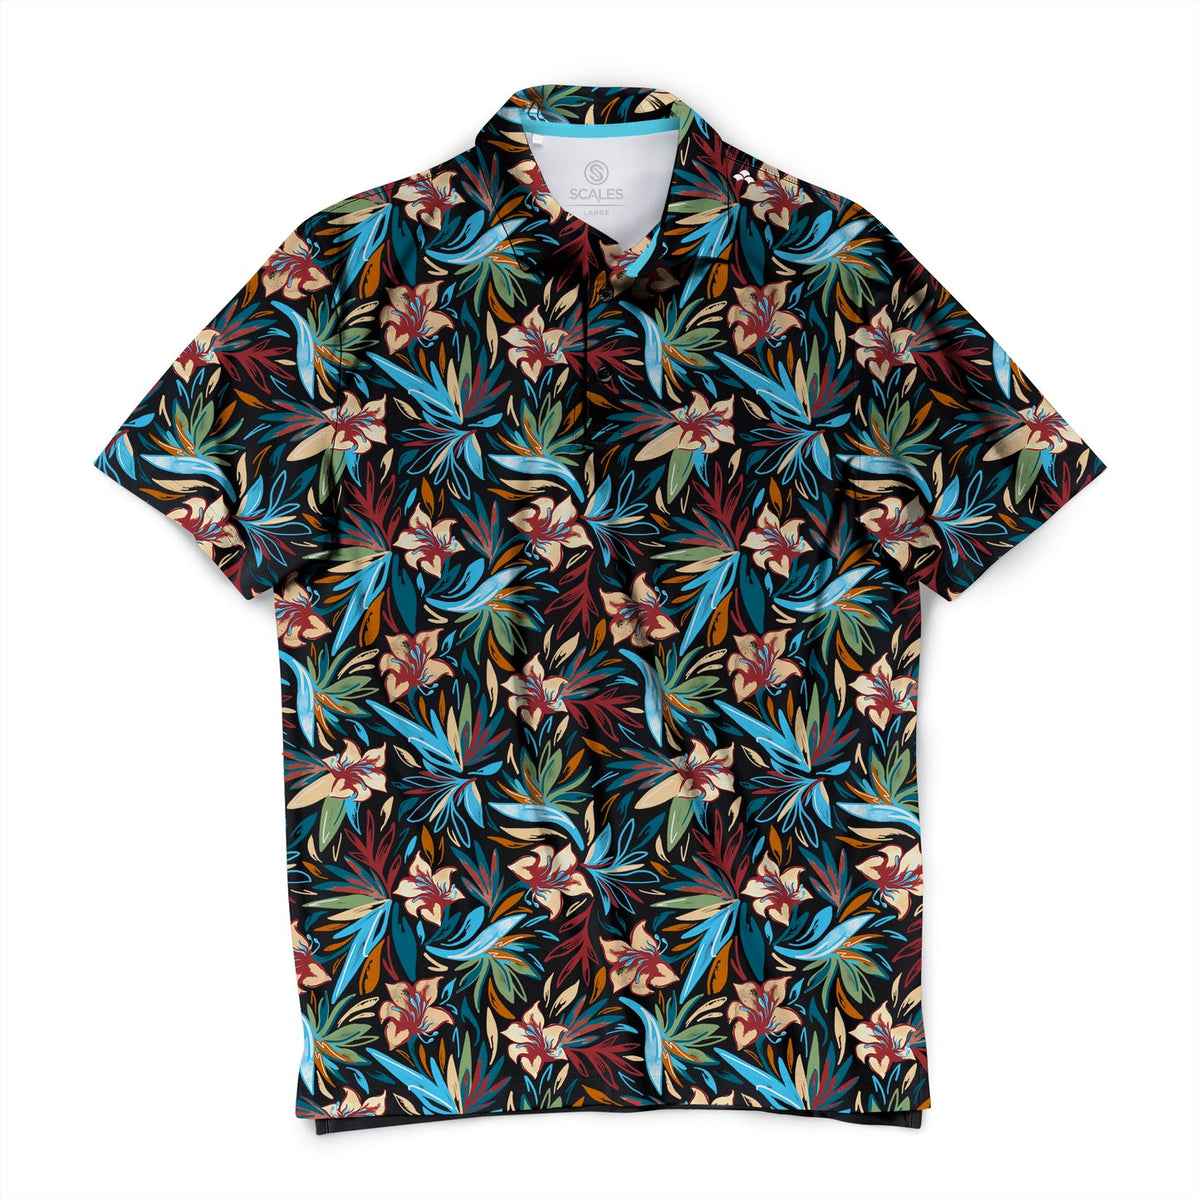 SCALES Wild Flowers Polo